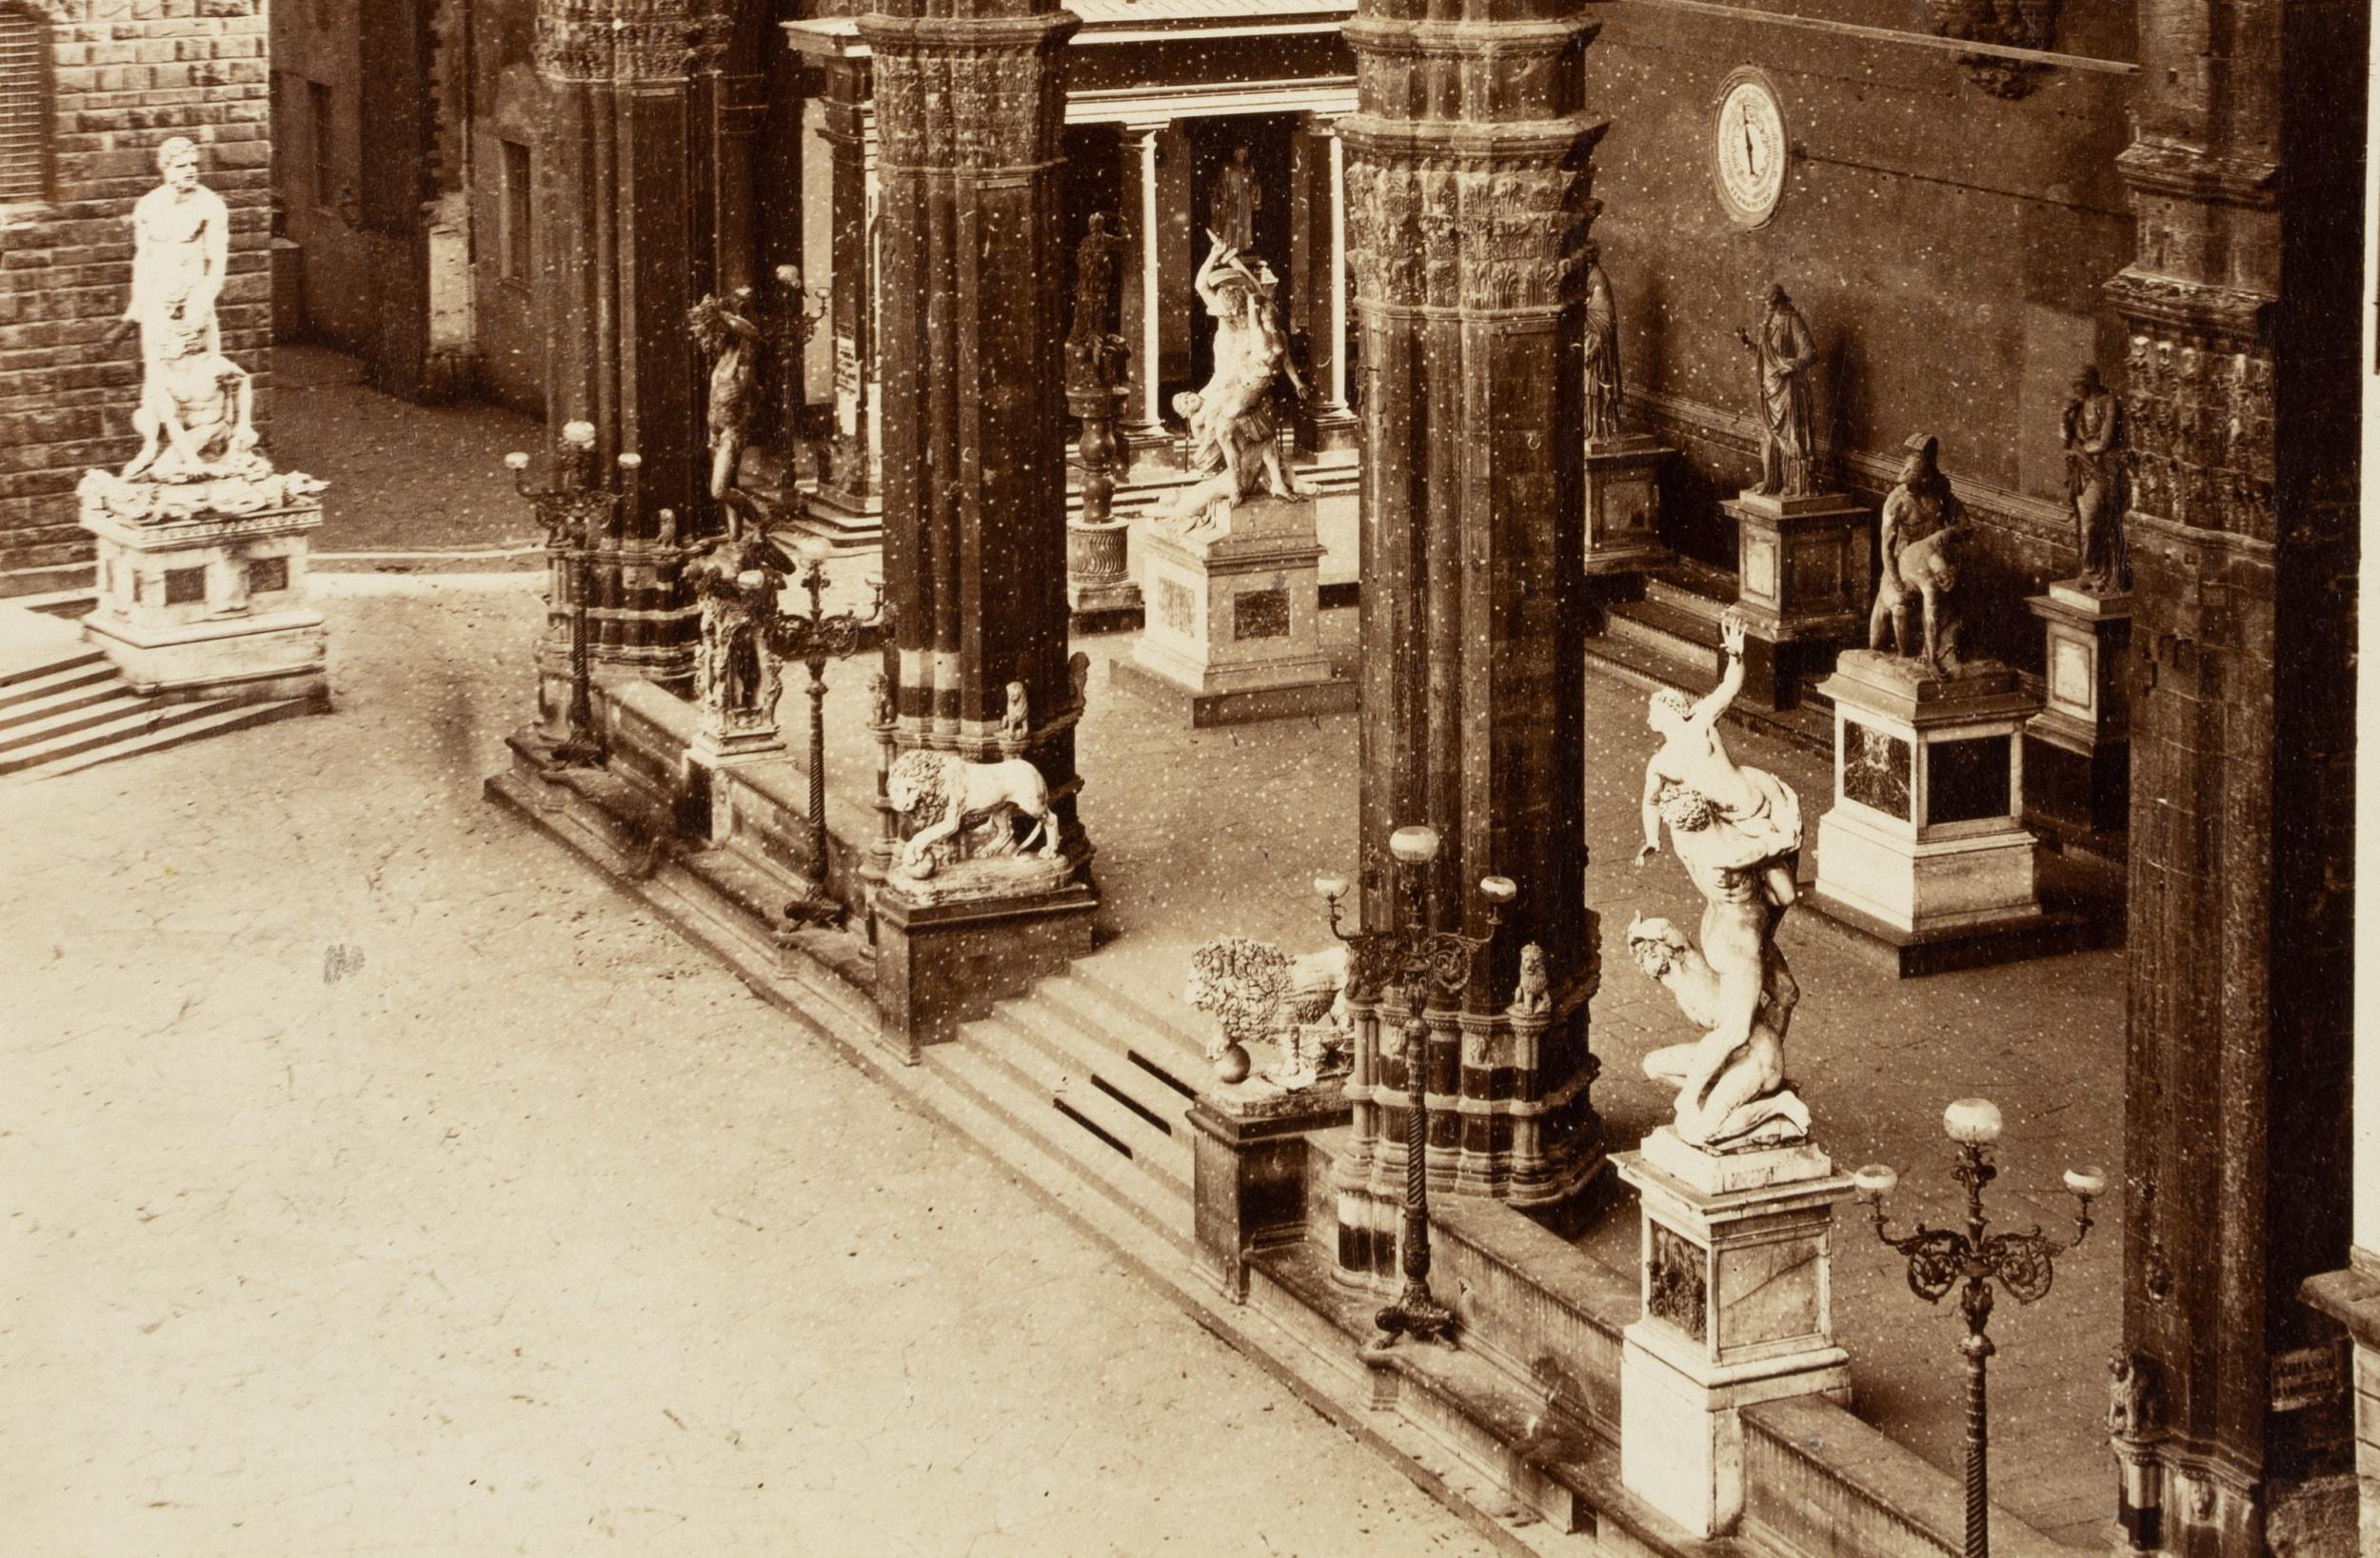 Fratelli Alinari (19th century) Circle: View from the window onto the Loggia dei Lanzi, Florence, Italy, c. 1880, albumen paper print

Technique: albumen paper print, mounted on Cardboard

Inscription: At the lower part inscribed on the support: